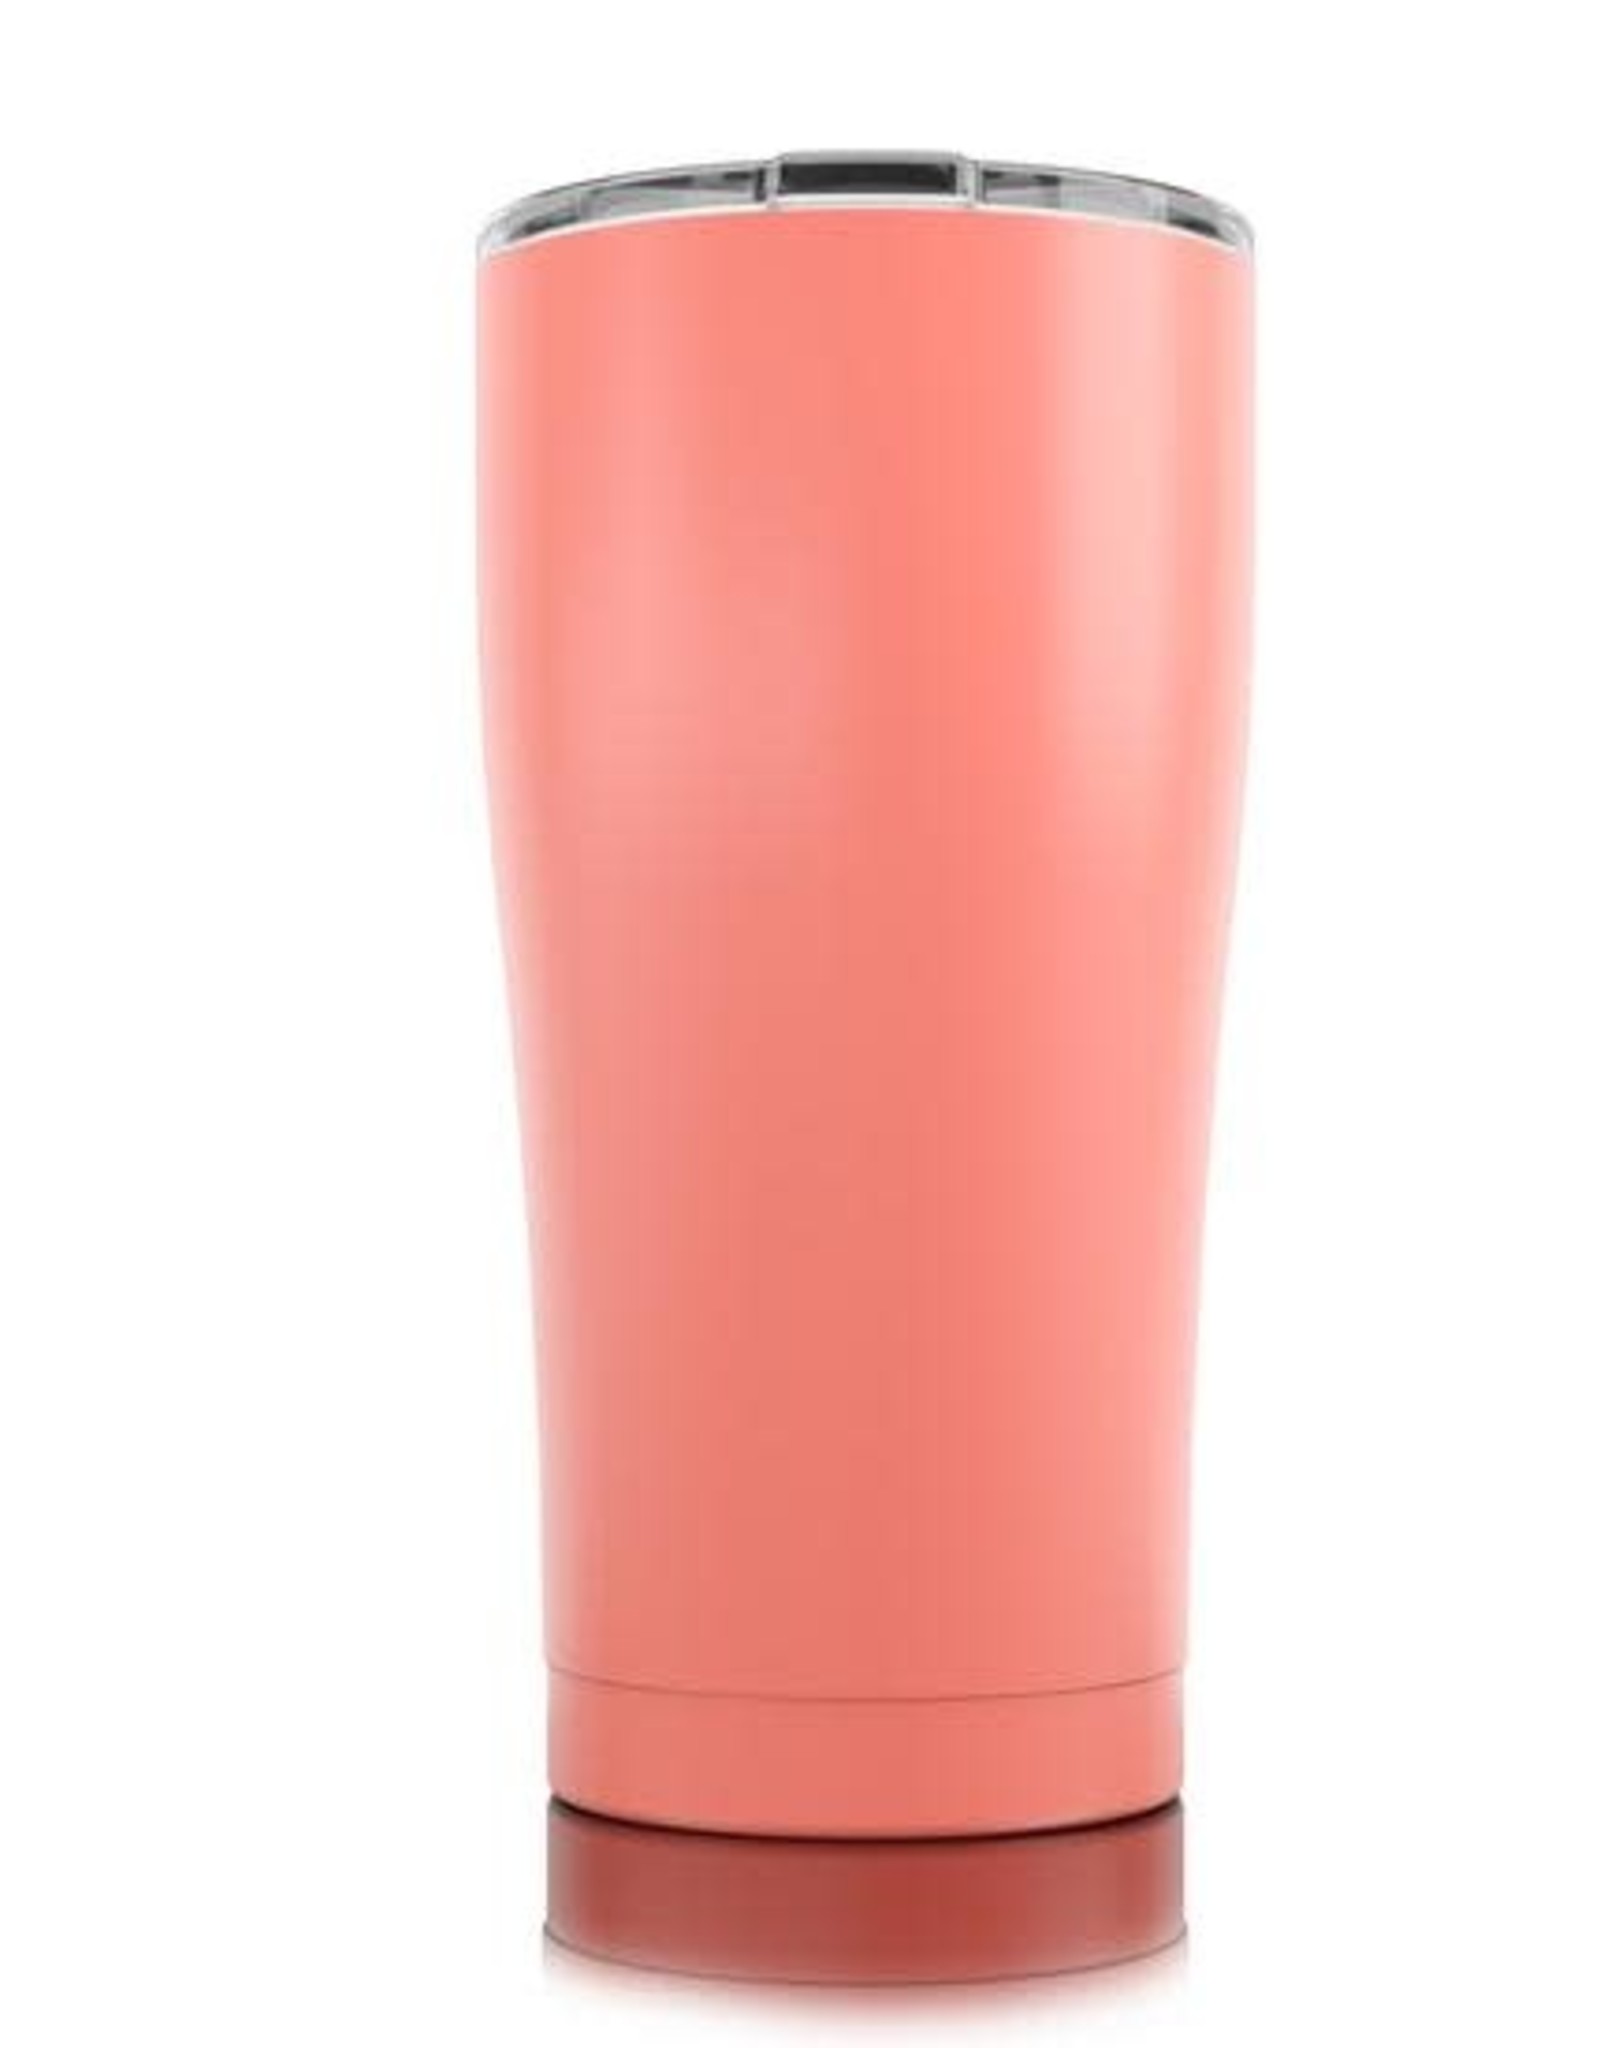 SIC 20 oz. Matte Coral Stainless Steel Tumbler